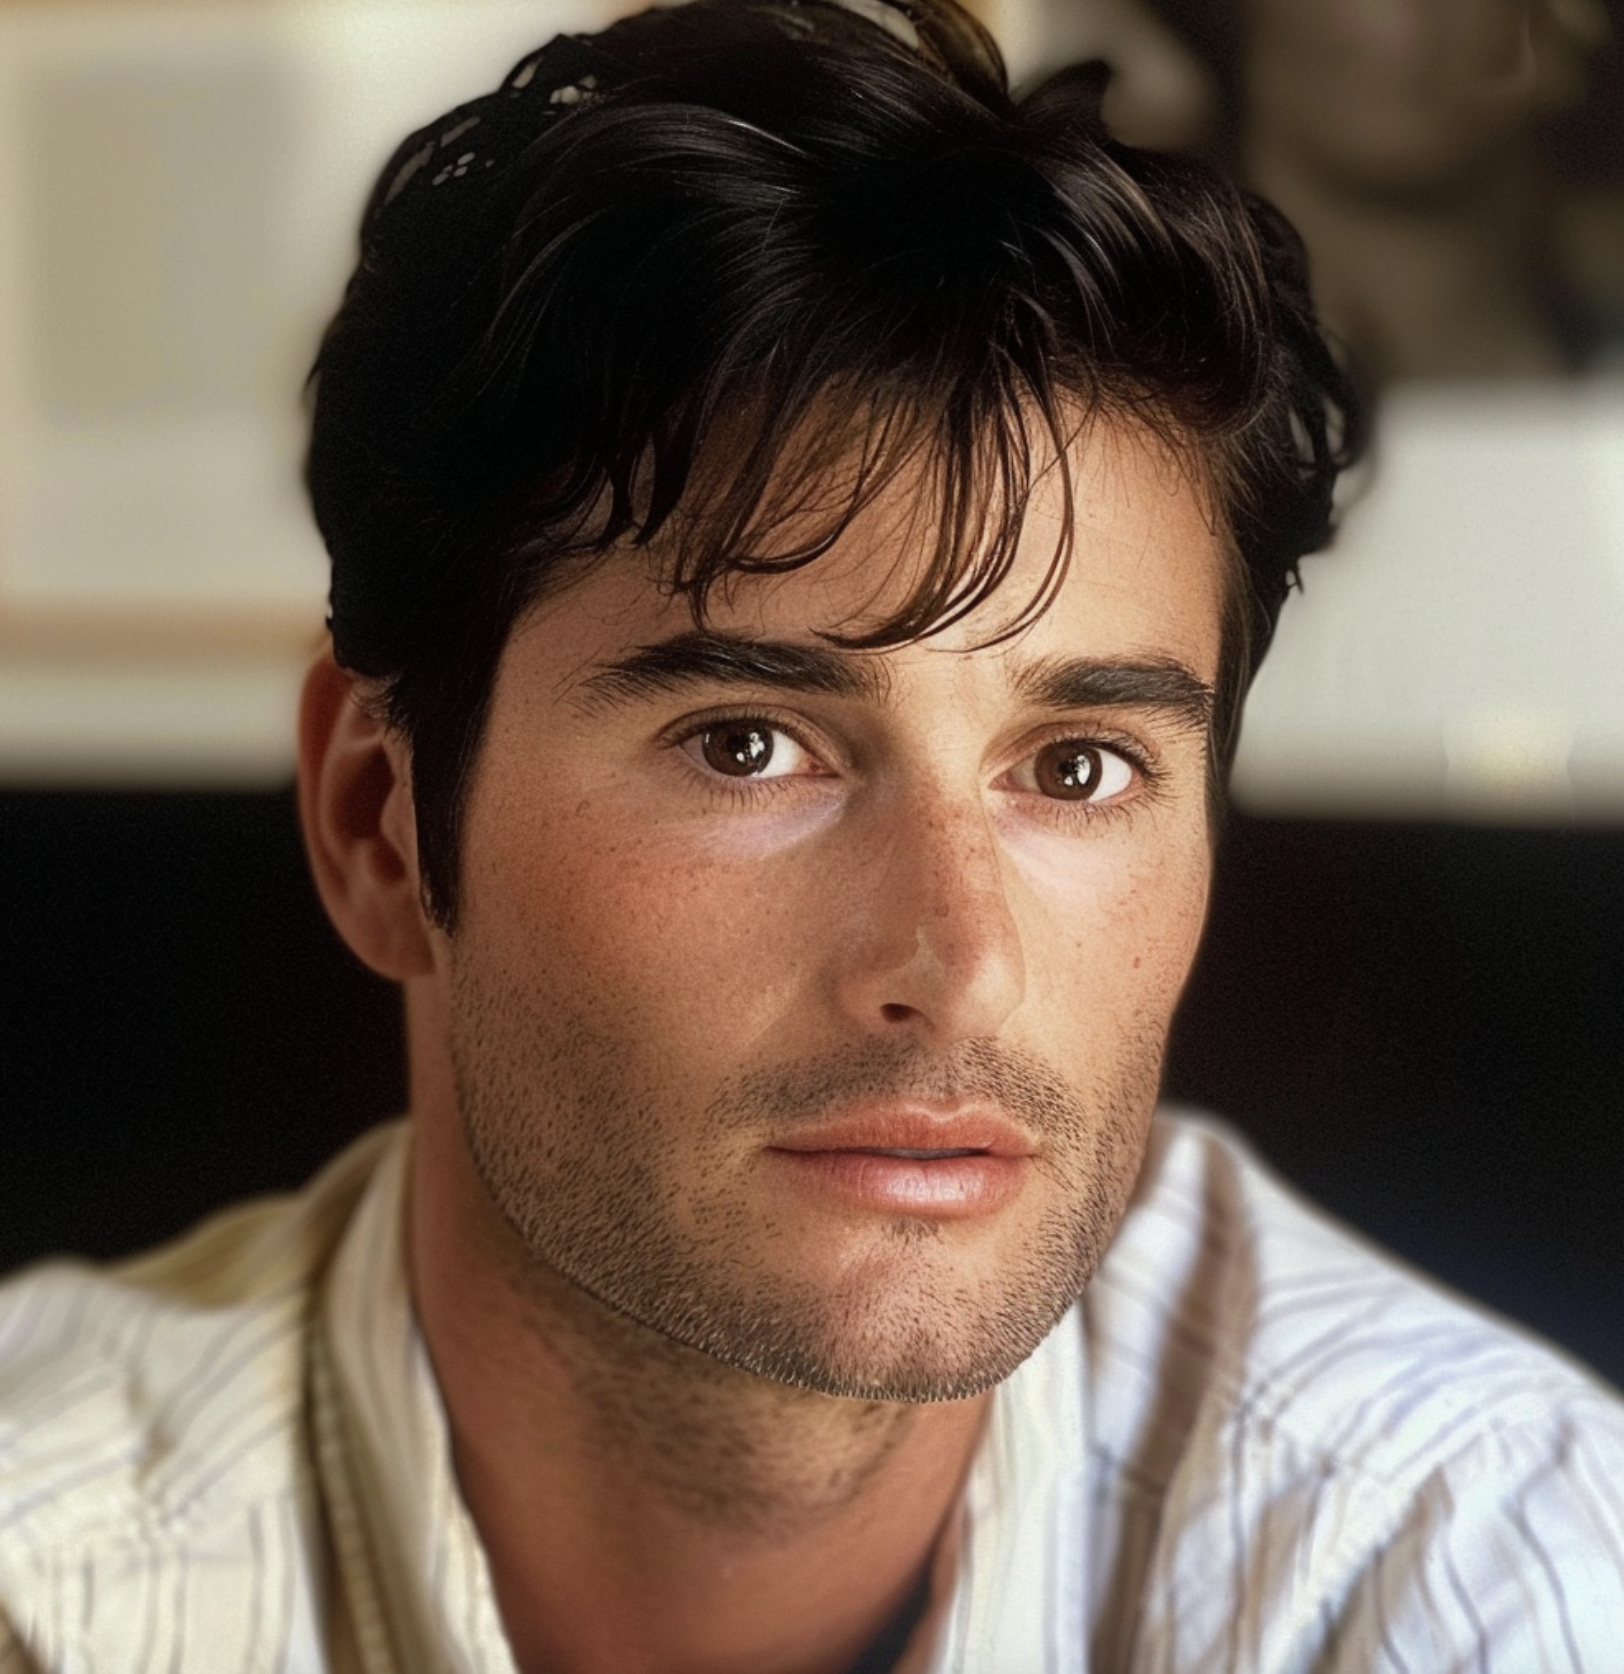 An AI generated photo of Demi Moore as a man | Source: Midjourney